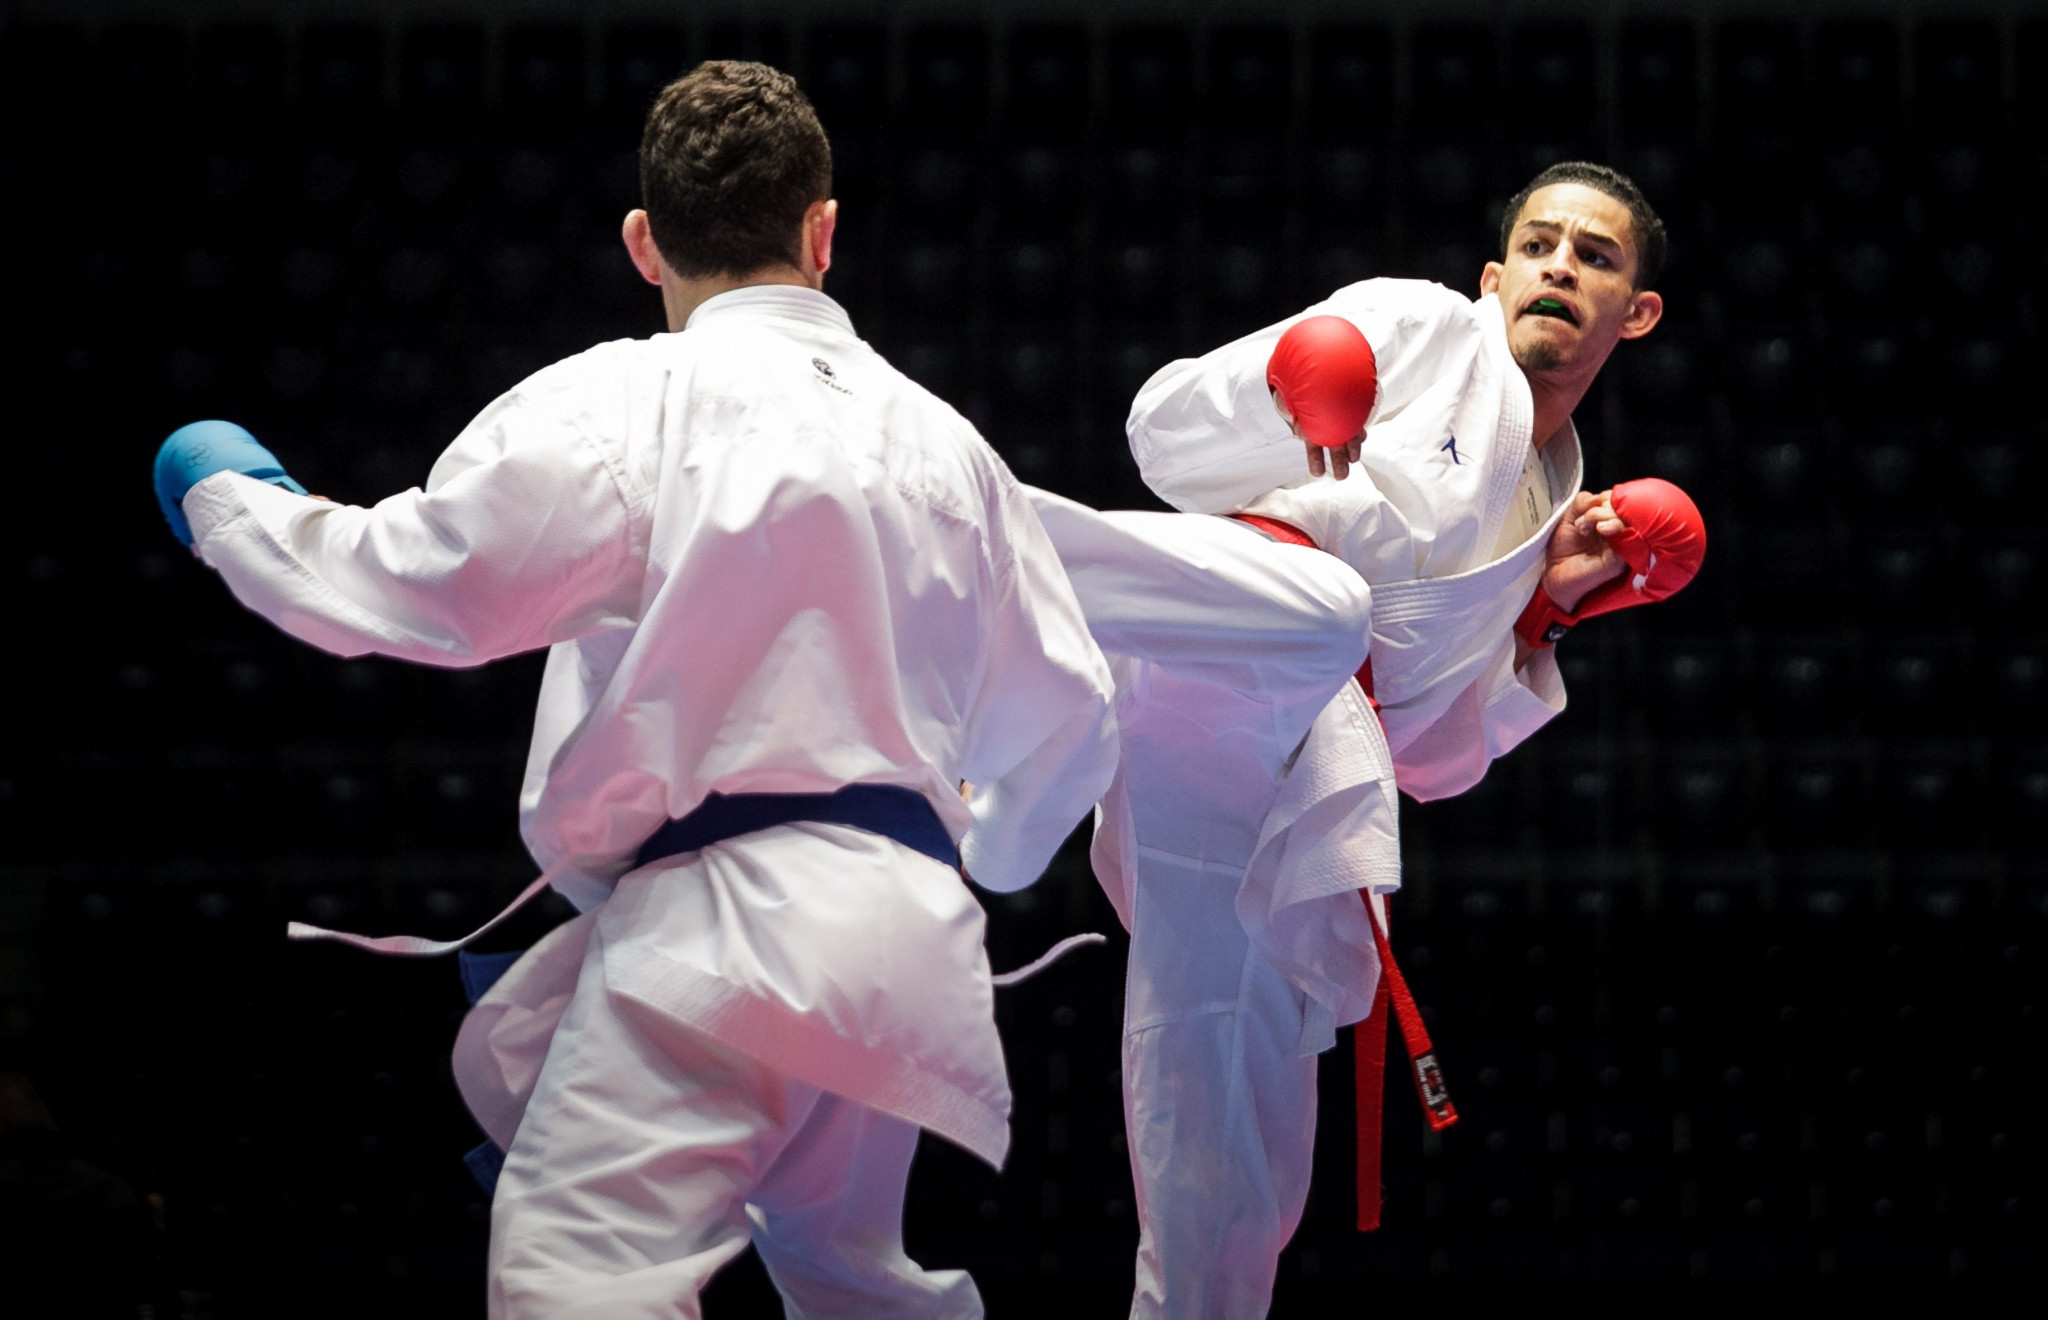 COVID-19 forces England to name reduced squad for European Karate Championships